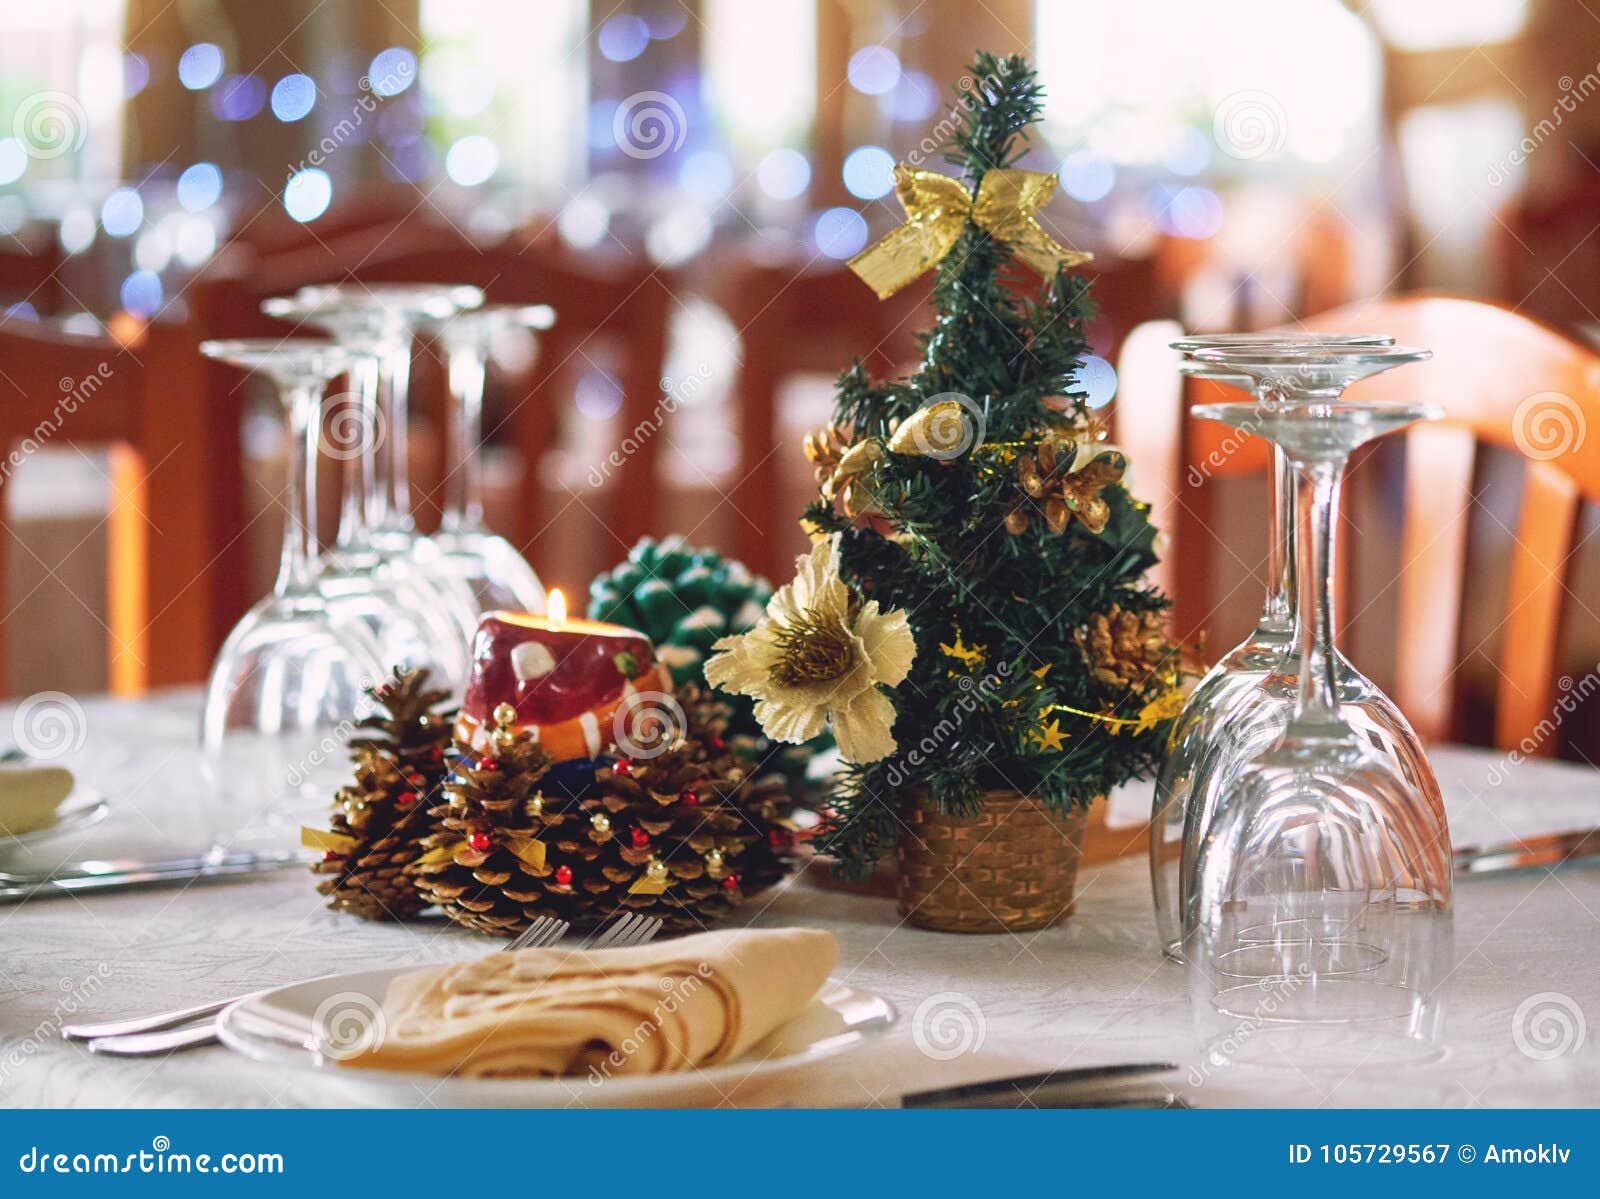 Table Setting With Christmas Decorations Stock Image Image Of